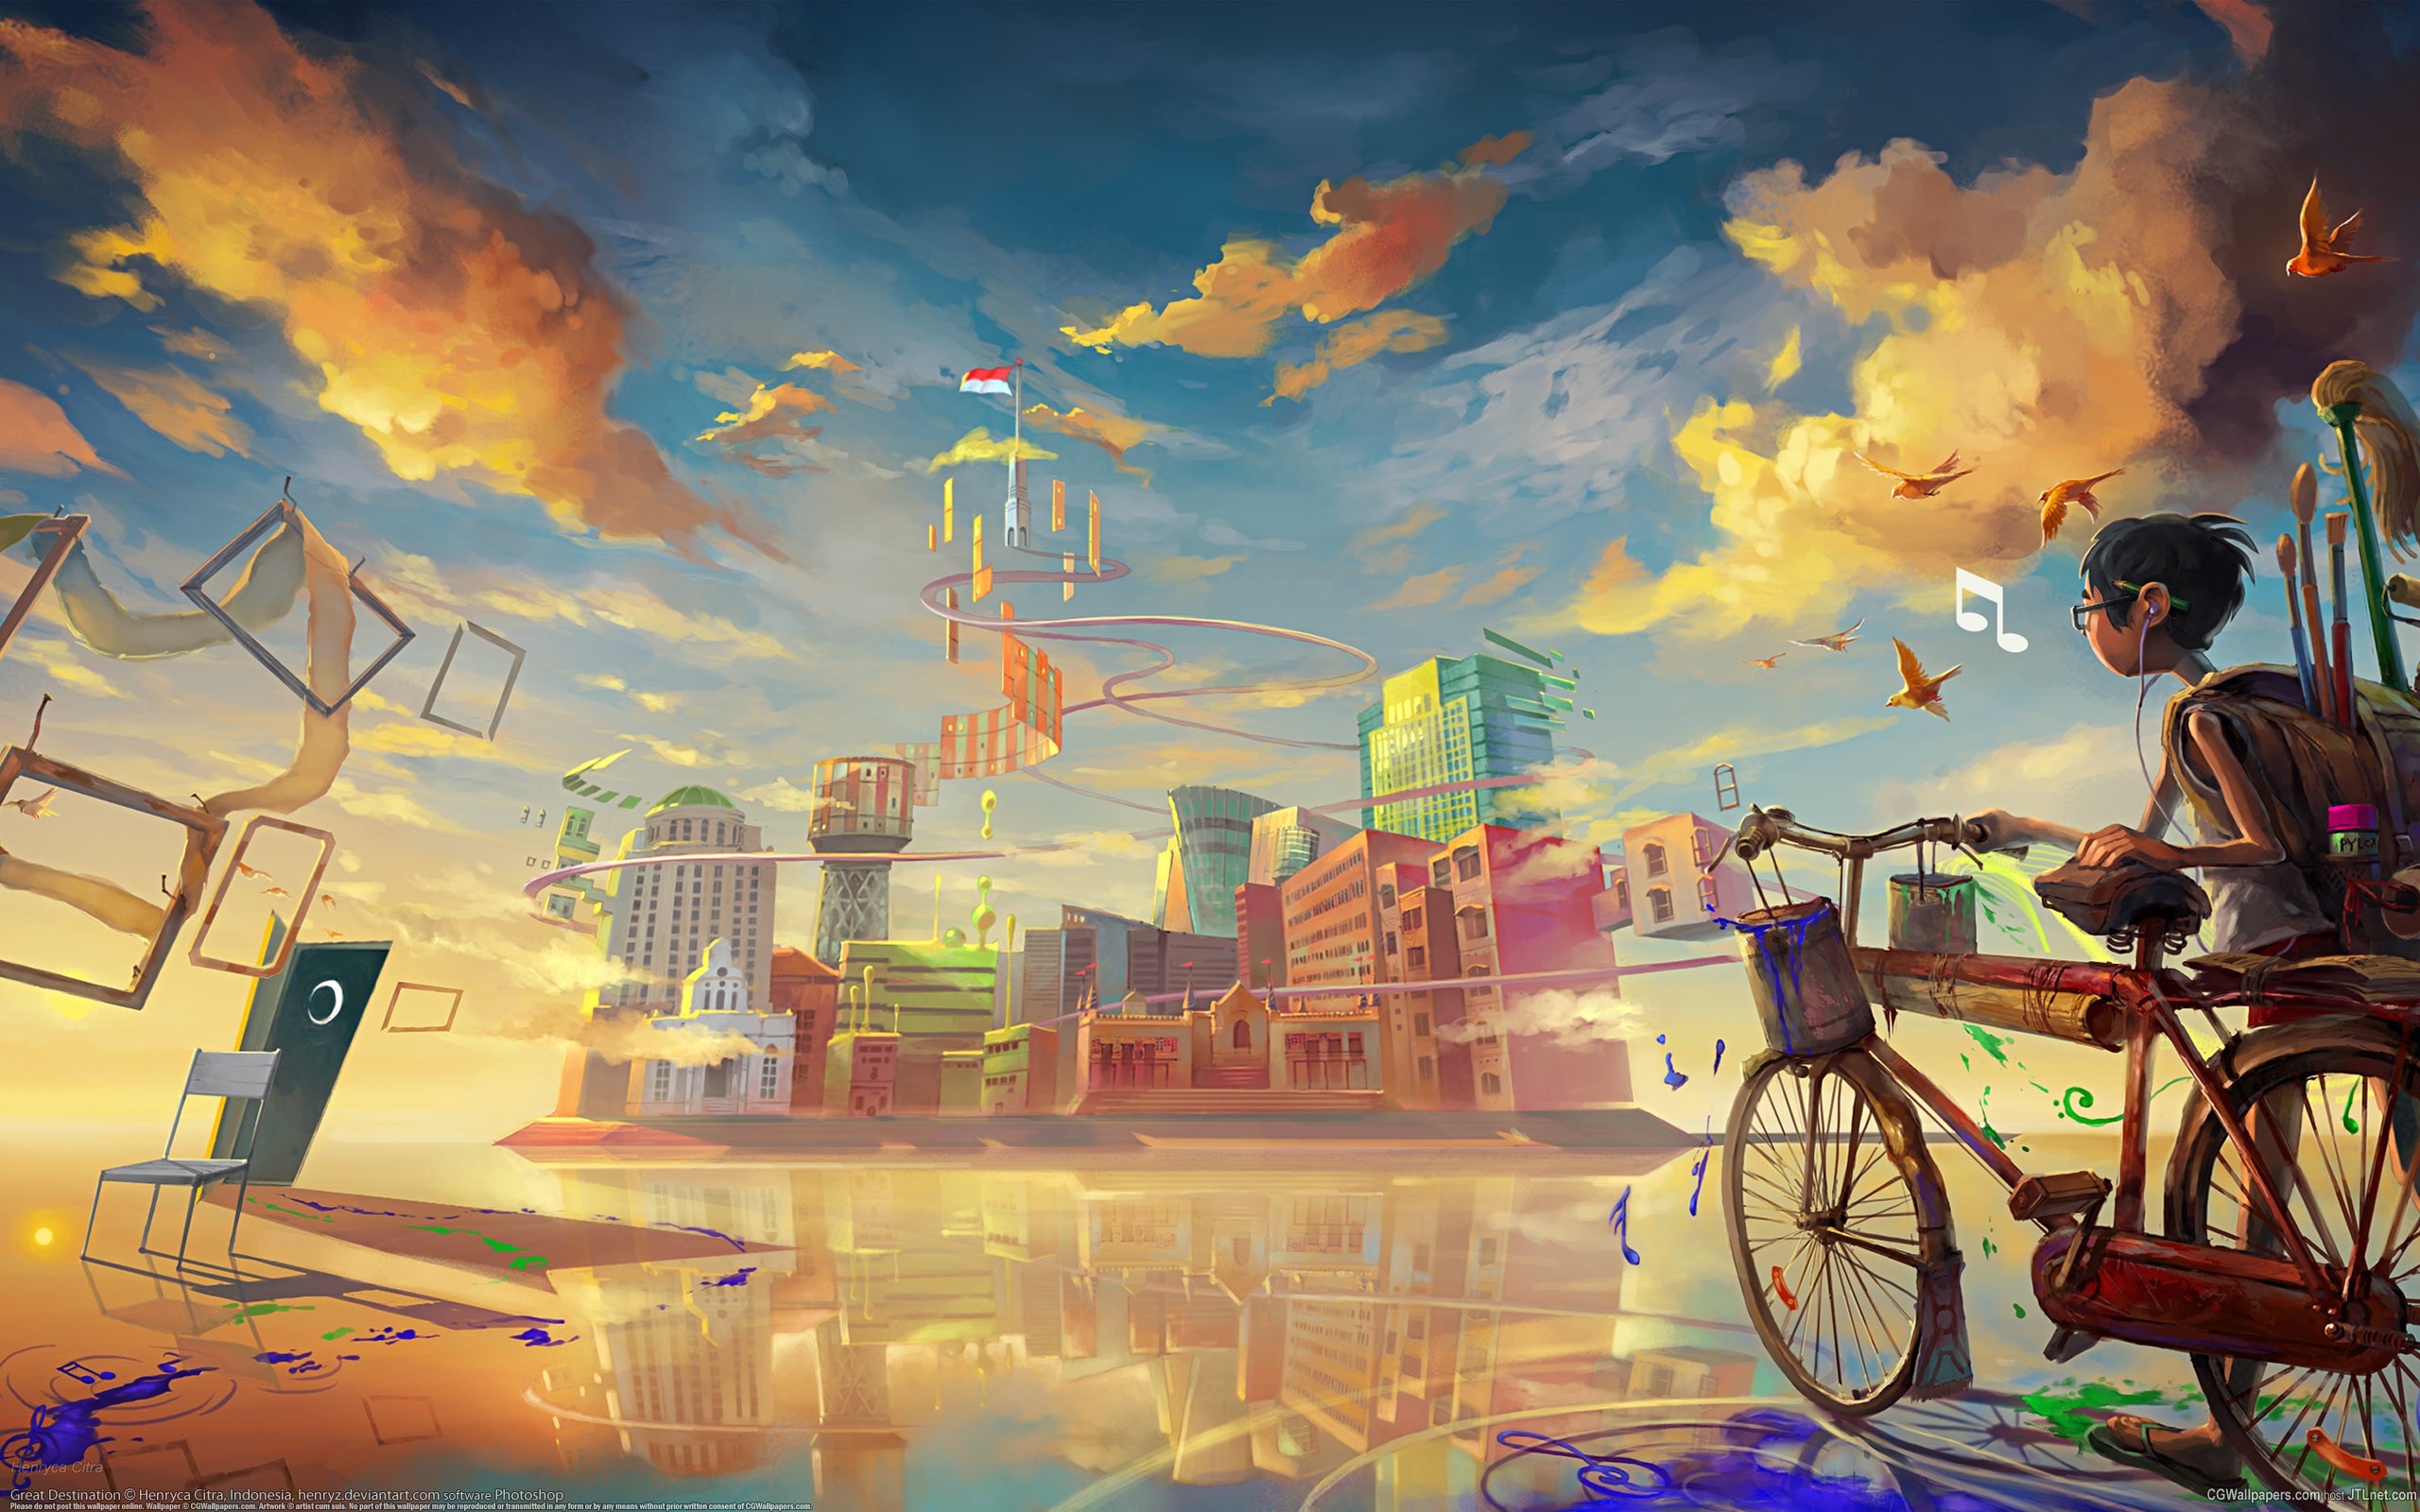 General 2560x1600 digital art fantasy art painting DeviantArt bicycle futuristic clouds building city flag reflection chair surreal colorful musical notes birds